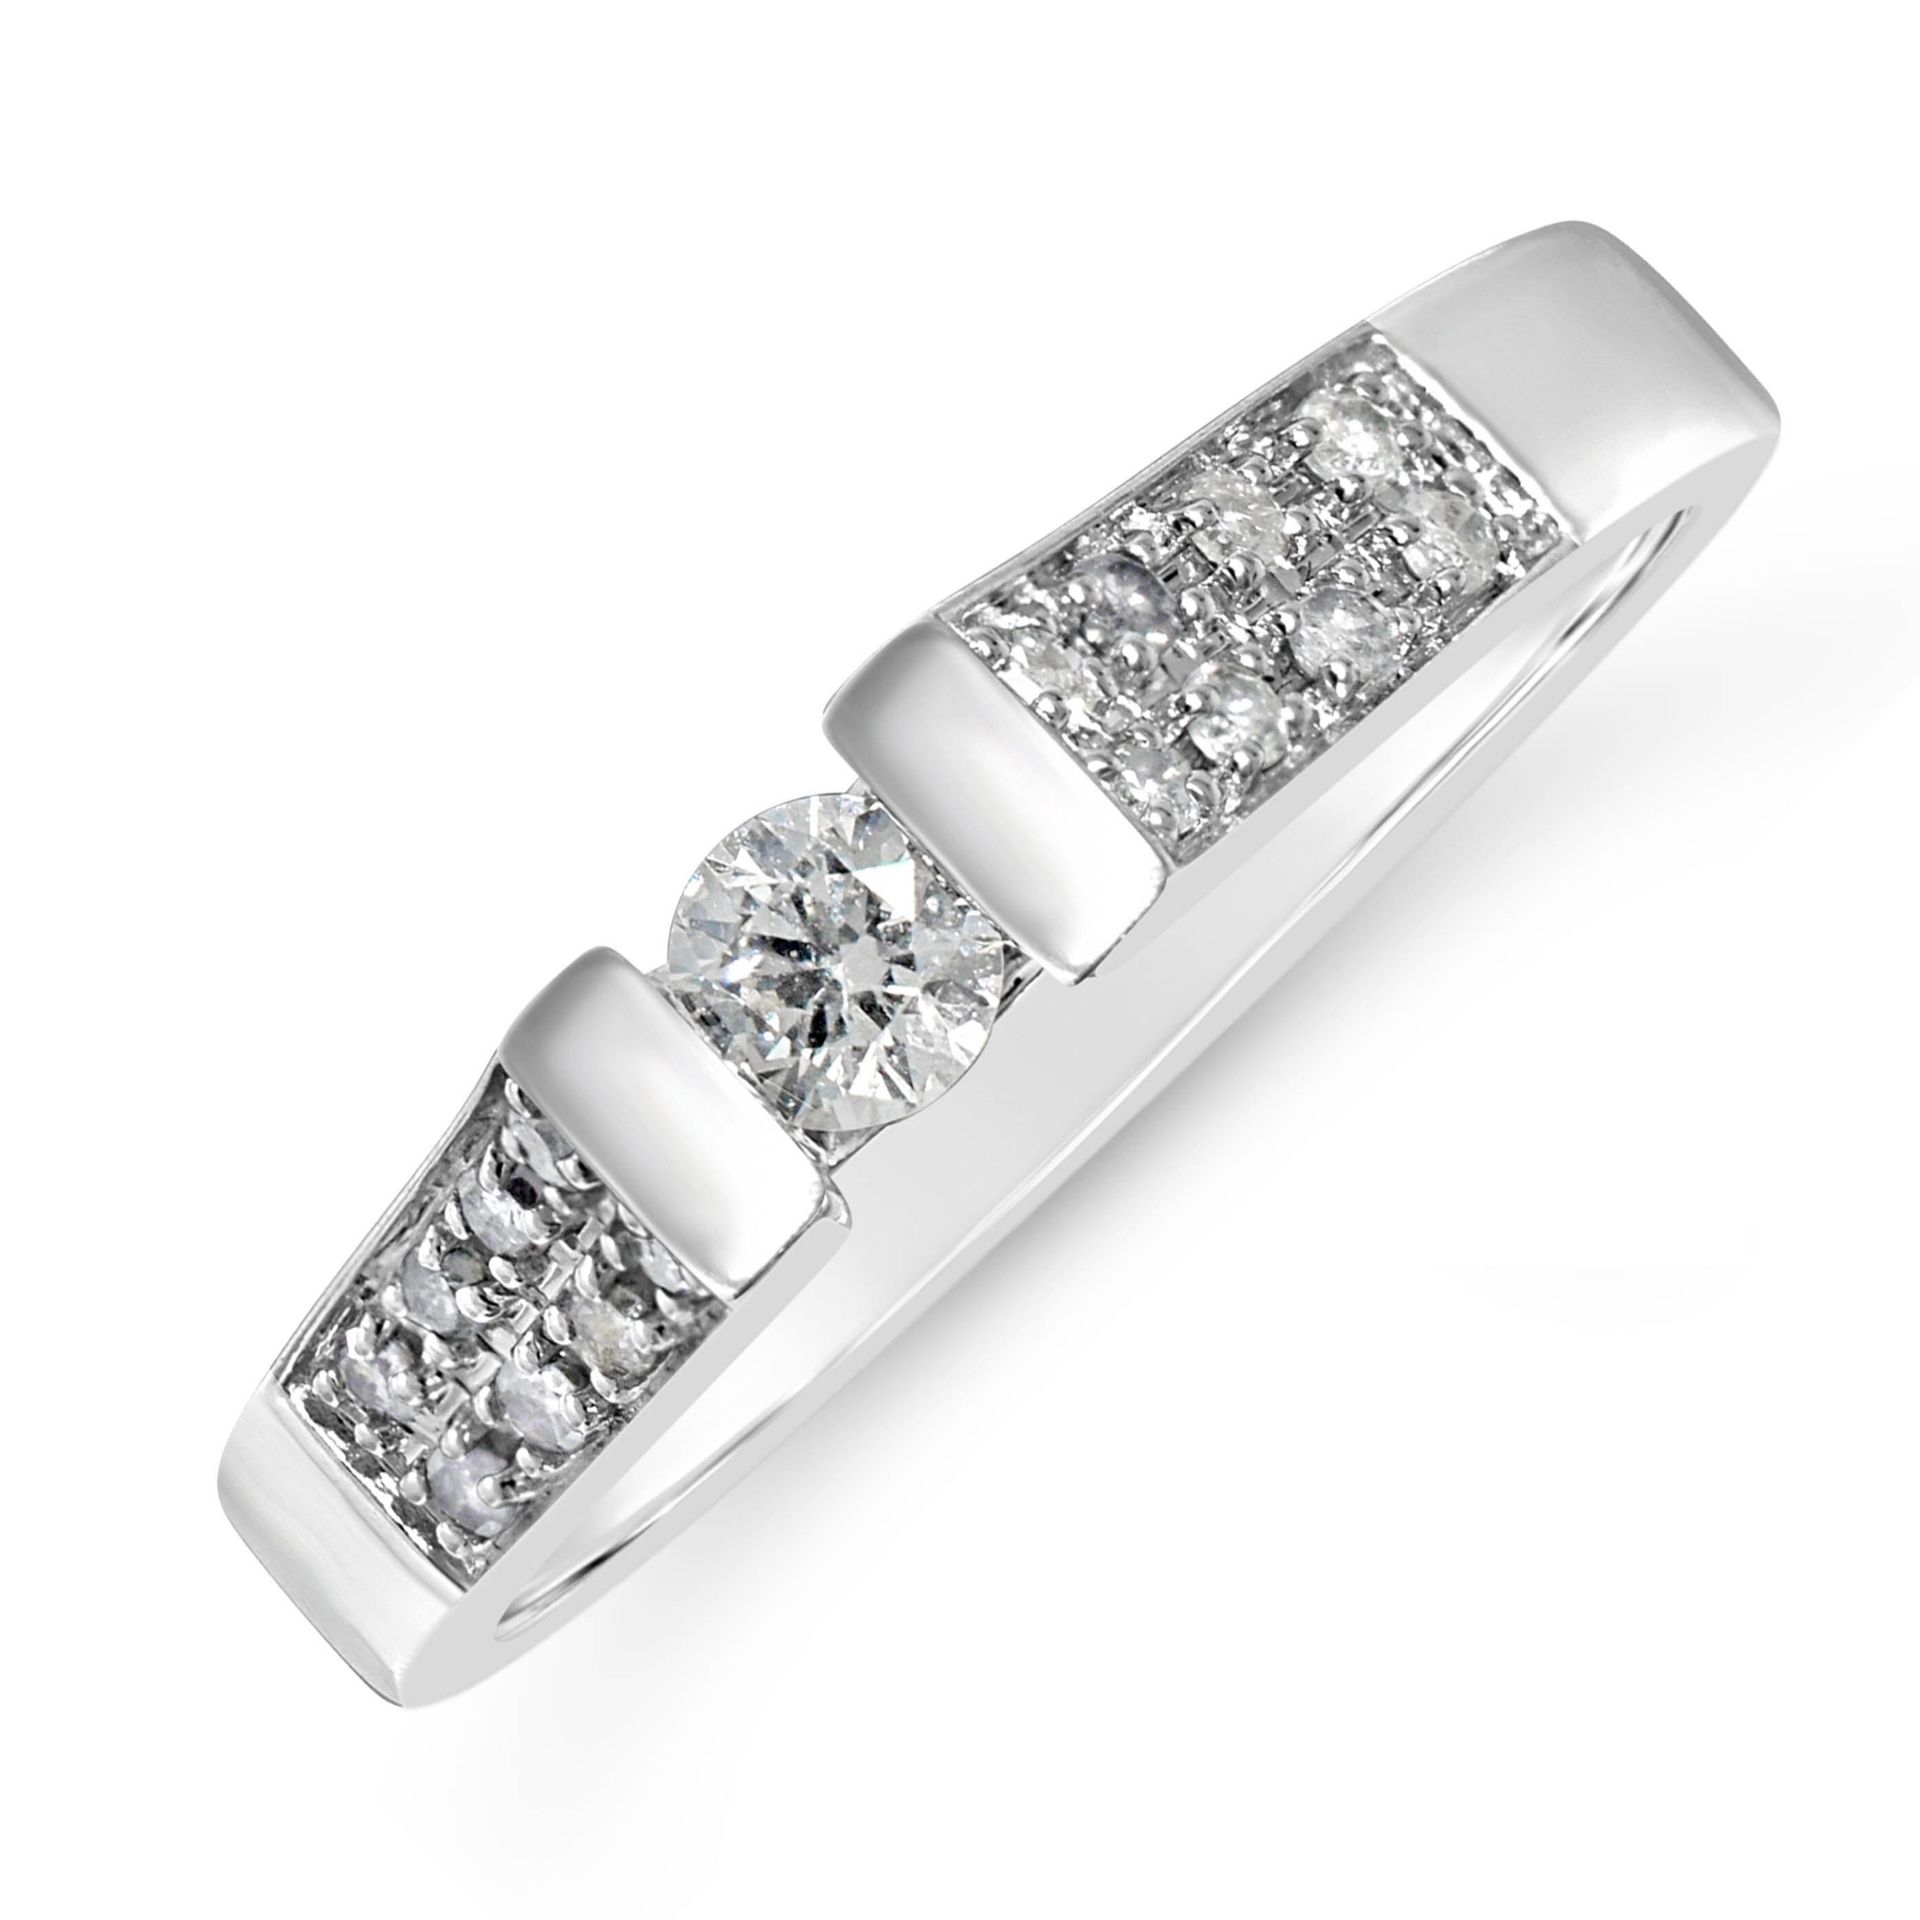 Solitaire Ring With Stone Set Shoulders, 14ct White Gold, RRP £1,299 Weight 3.29g, Diamond Weight